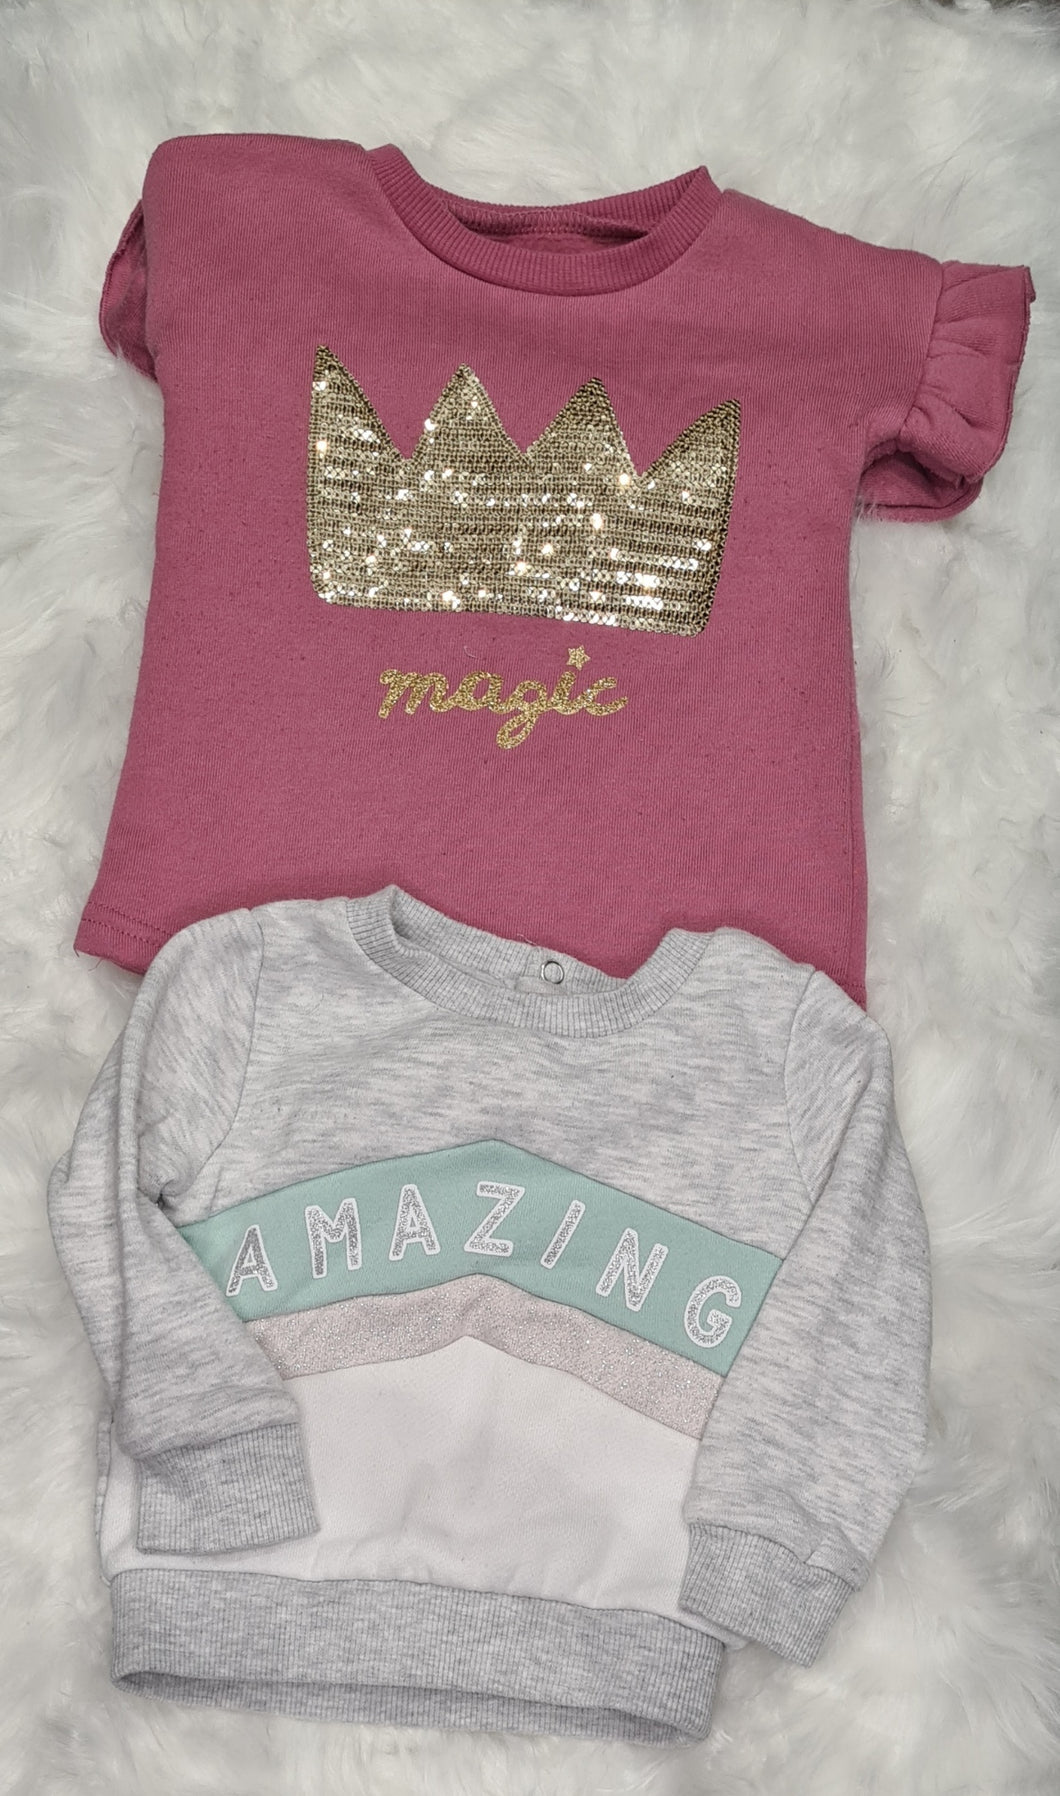 Girls 6-9 months - Set of 2 jumpers